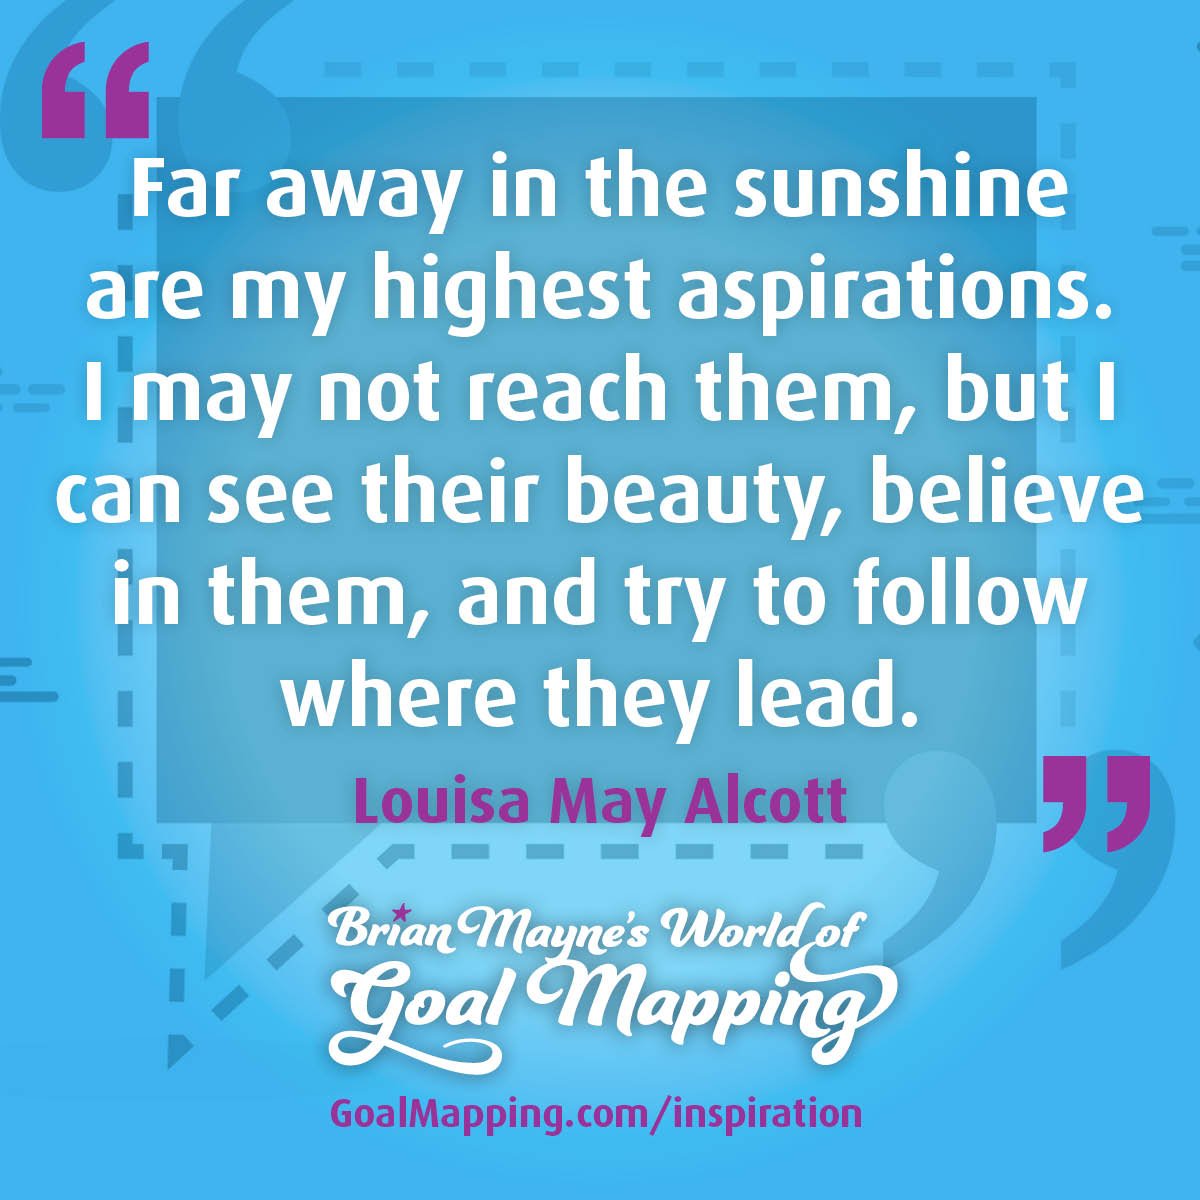 "Far away in the sunshine are my highest aspirations. I may not reach them, but I can see their beauty, believe in them, and try to follow where they lead." Louisa May Alcott